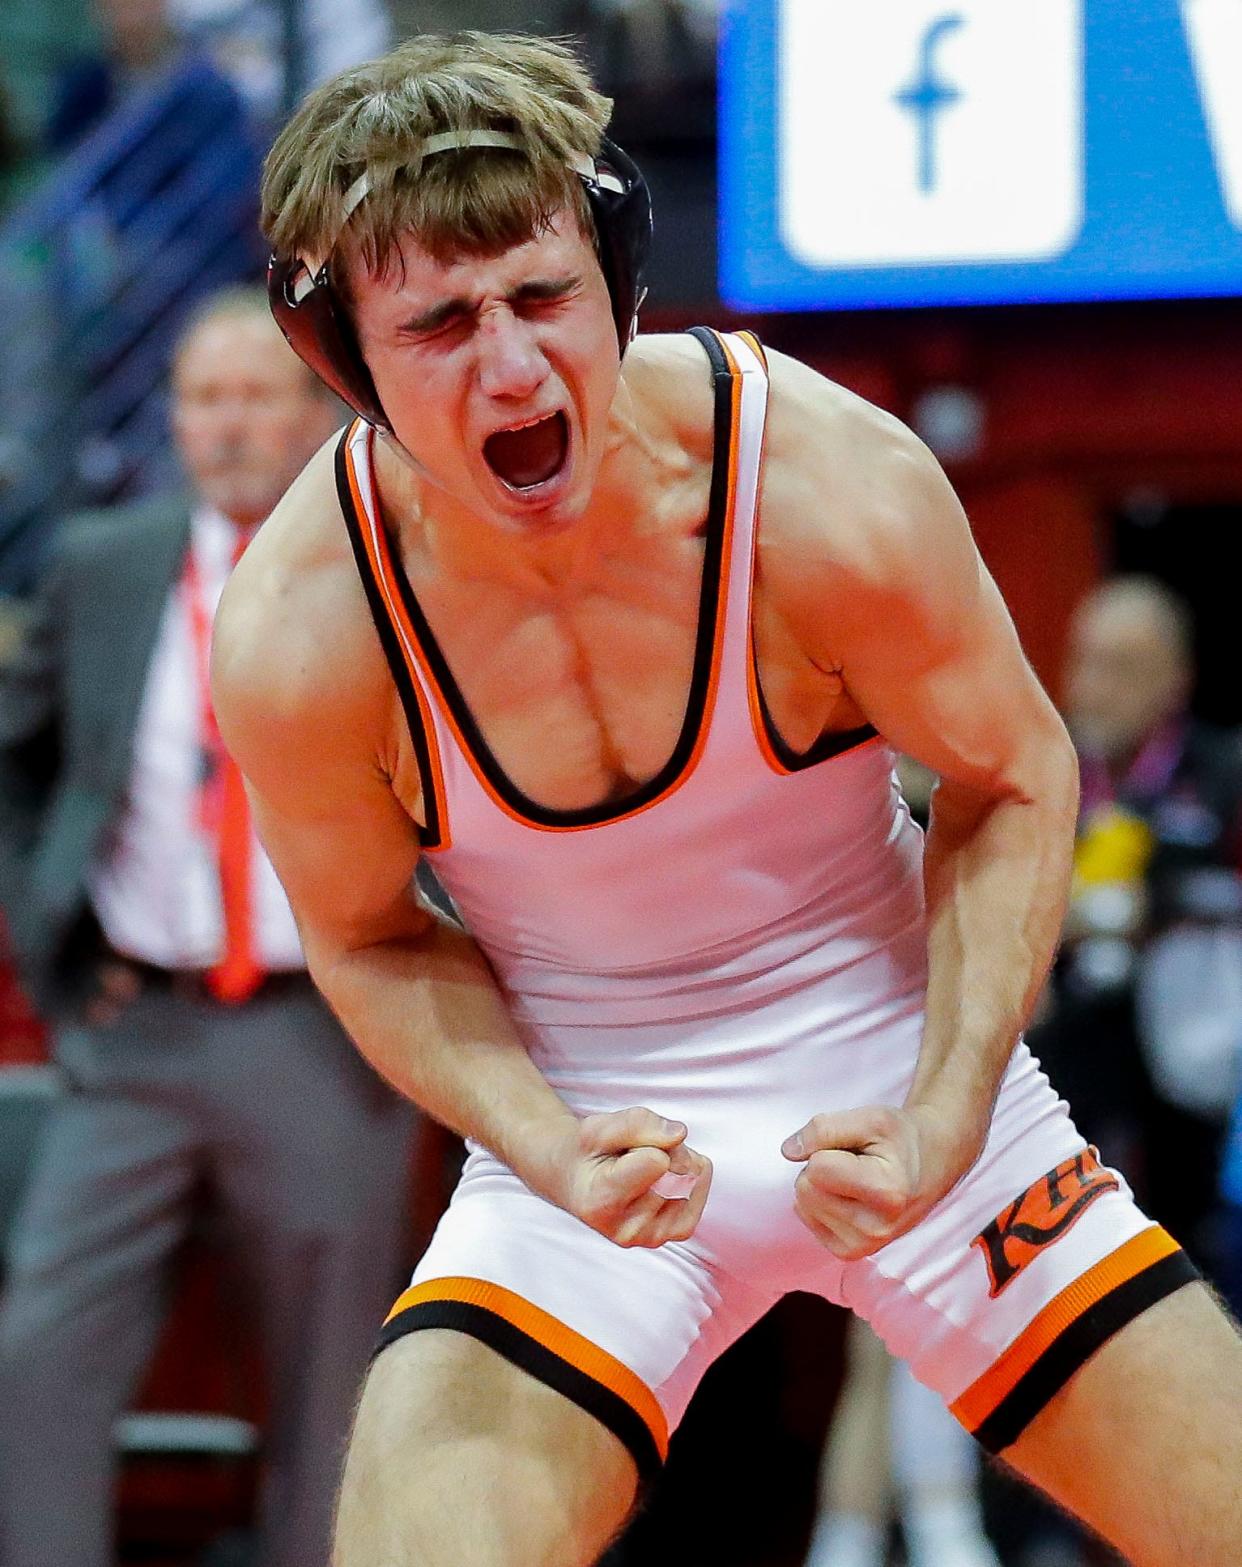 Kaukauna's Lucas Peters flexes after defeating Neenah's Jacob Herm in the Division 1 126-pound championship match during the WIAA individual state wrestling tournament Feb. 25 in Madison.